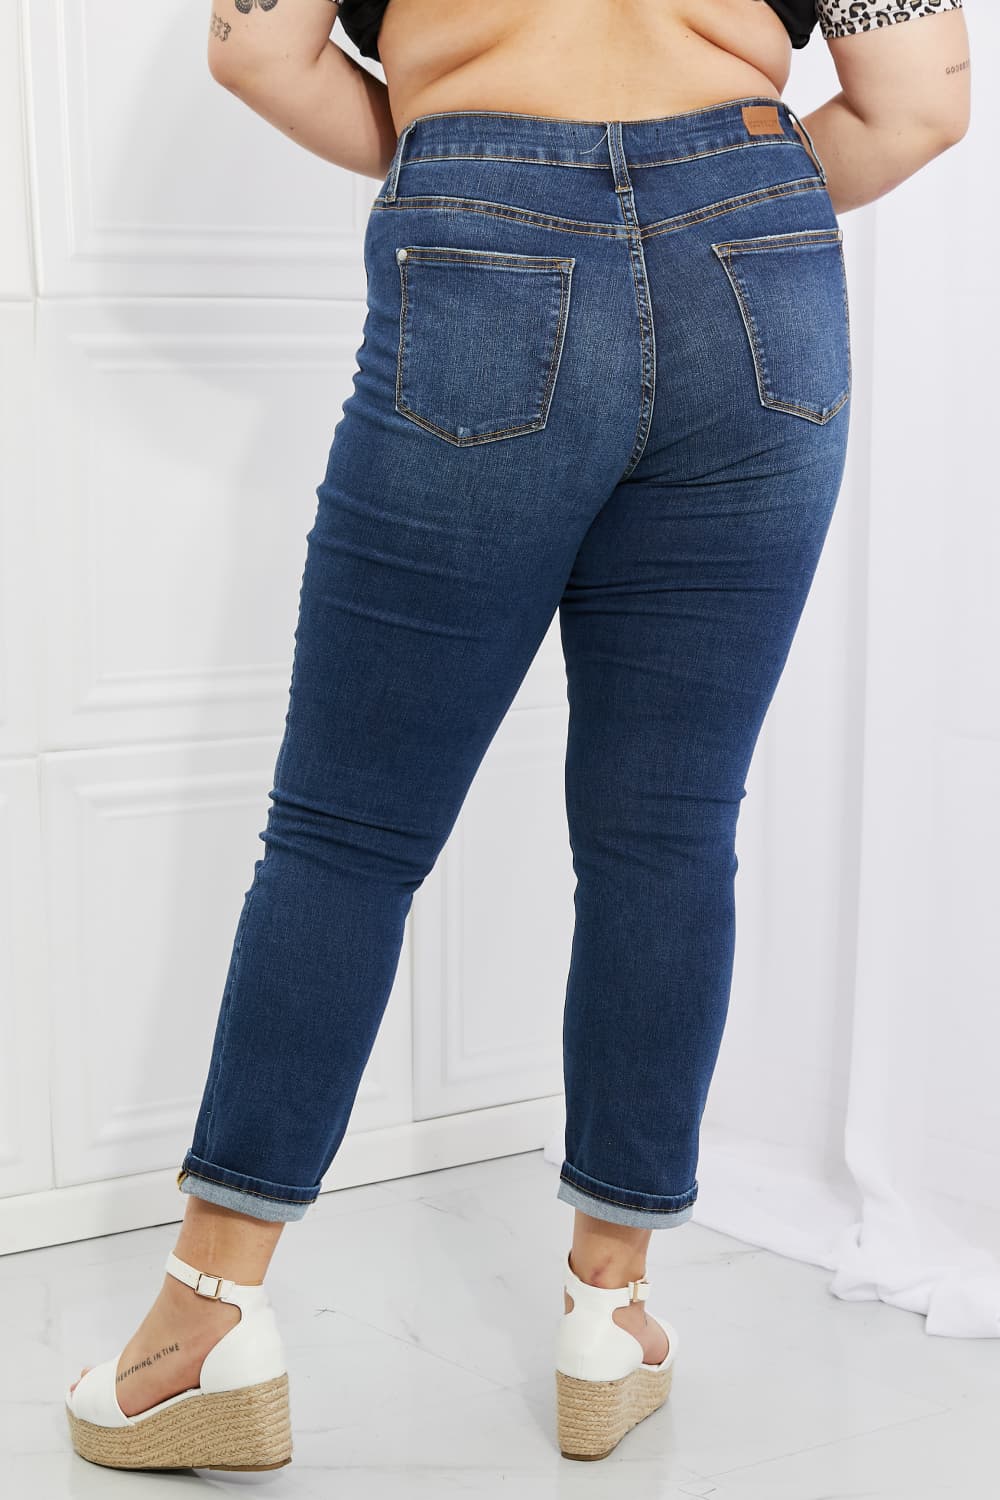 Judy Blue Crystal High Waisted Cuffed Boyfriend Jeans  Southern Soul Collectives 